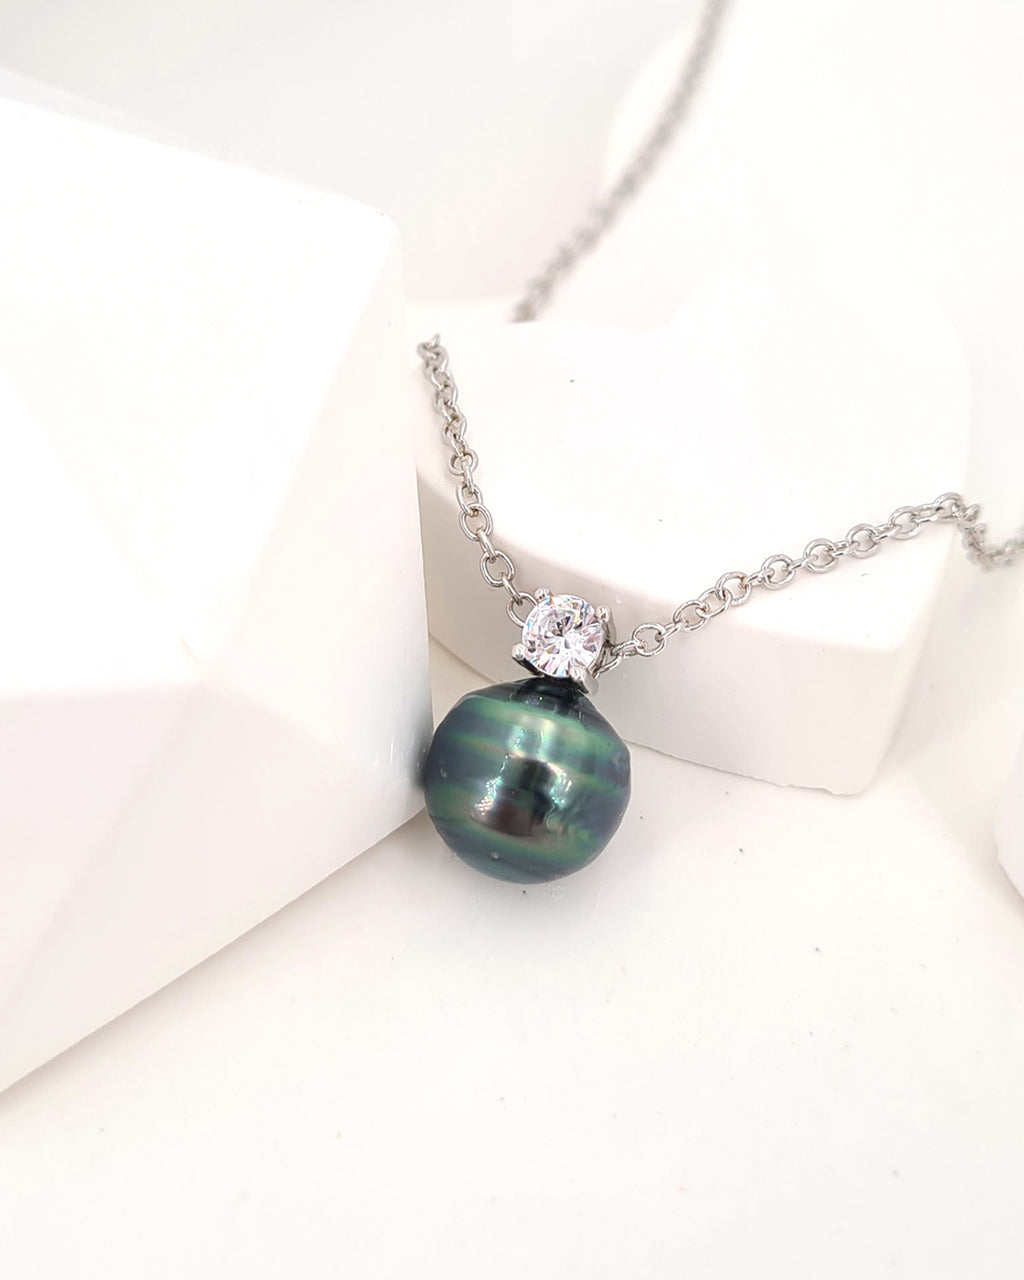 Tahitian Pearl Necklace - Affordable Luxurious Minimalist Pearl Drop Pendant Necklace Jewelry